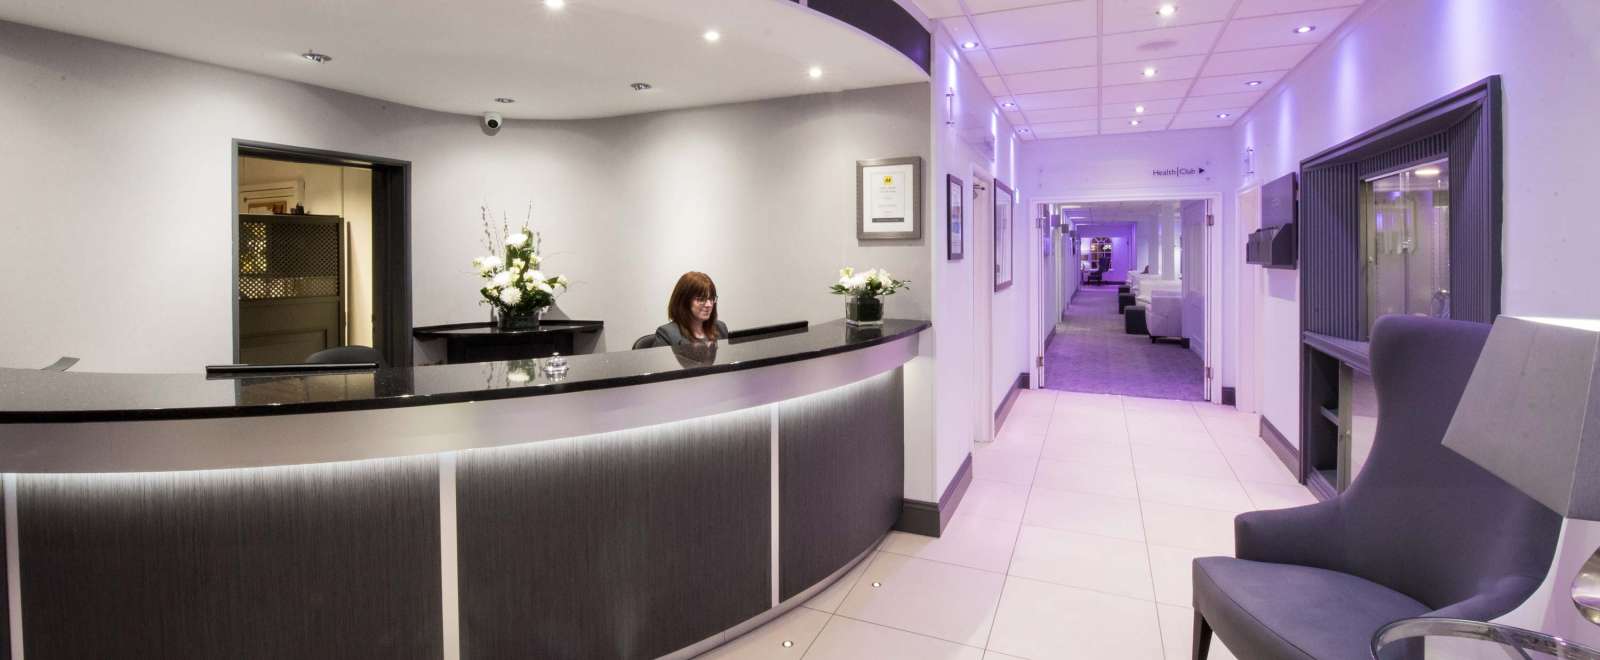 Barnstaple Hotel Foyer with Receptionist and Seating Area